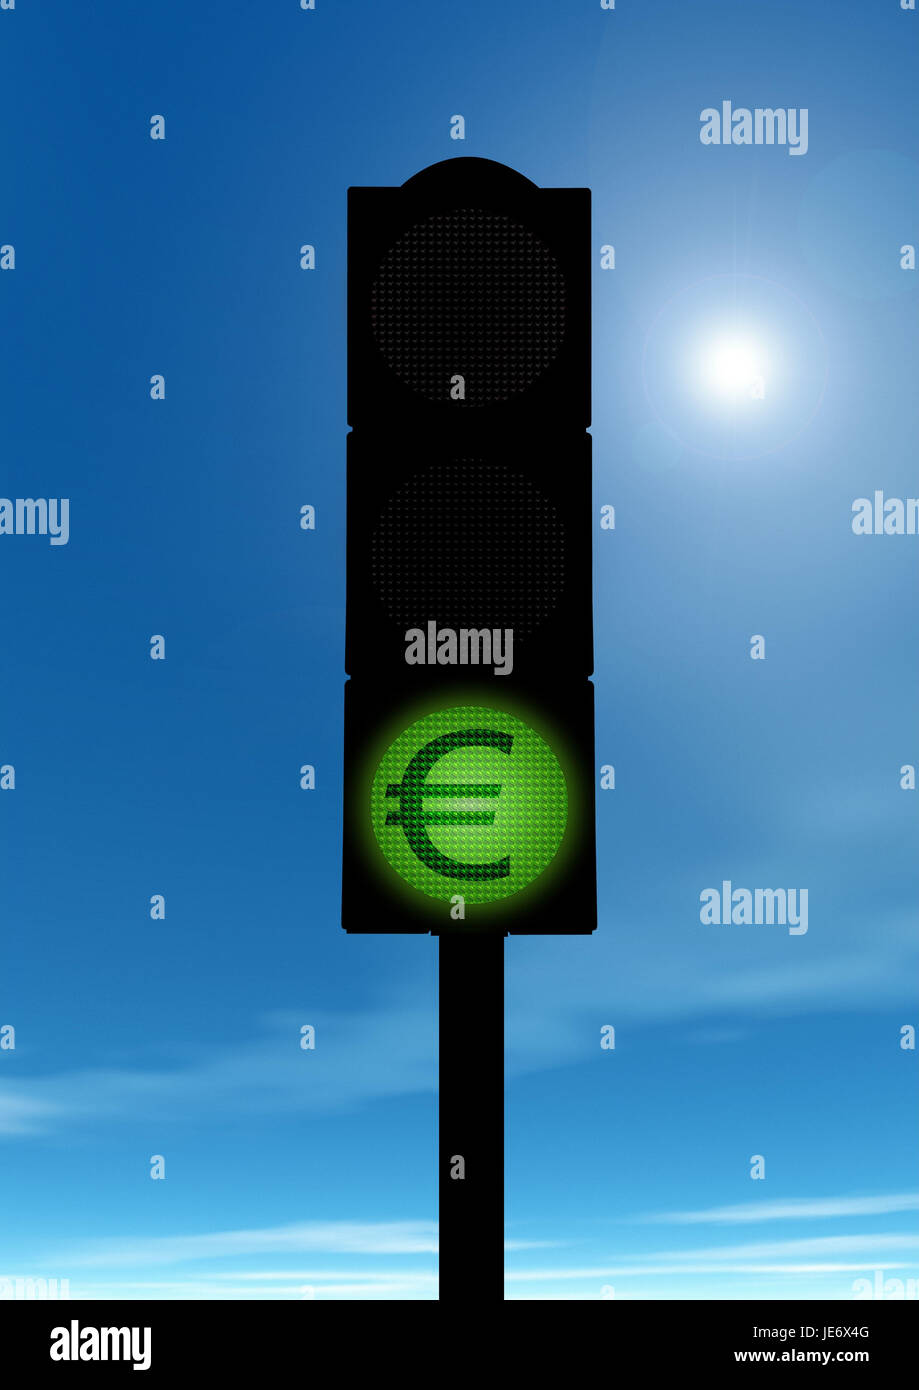 green traffic light with eurocharacter, Stock Photo